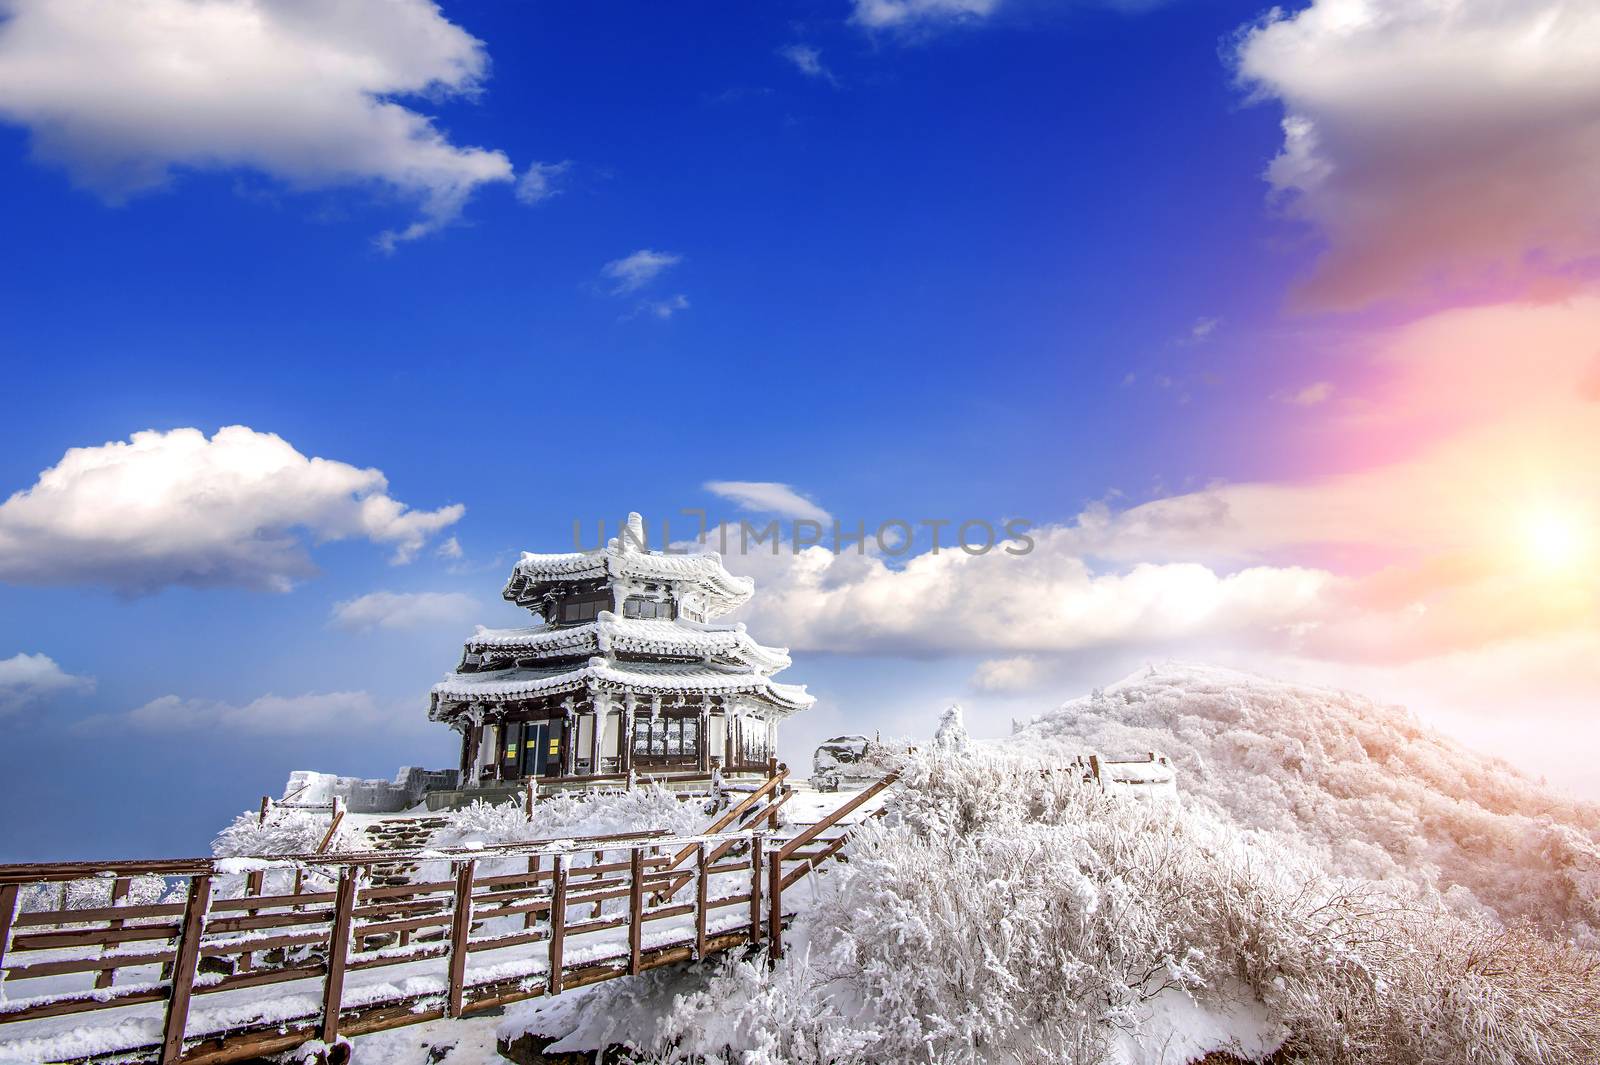 Deogyusan mountains is covered by snow in winter,South Korea.Sunset landscape.